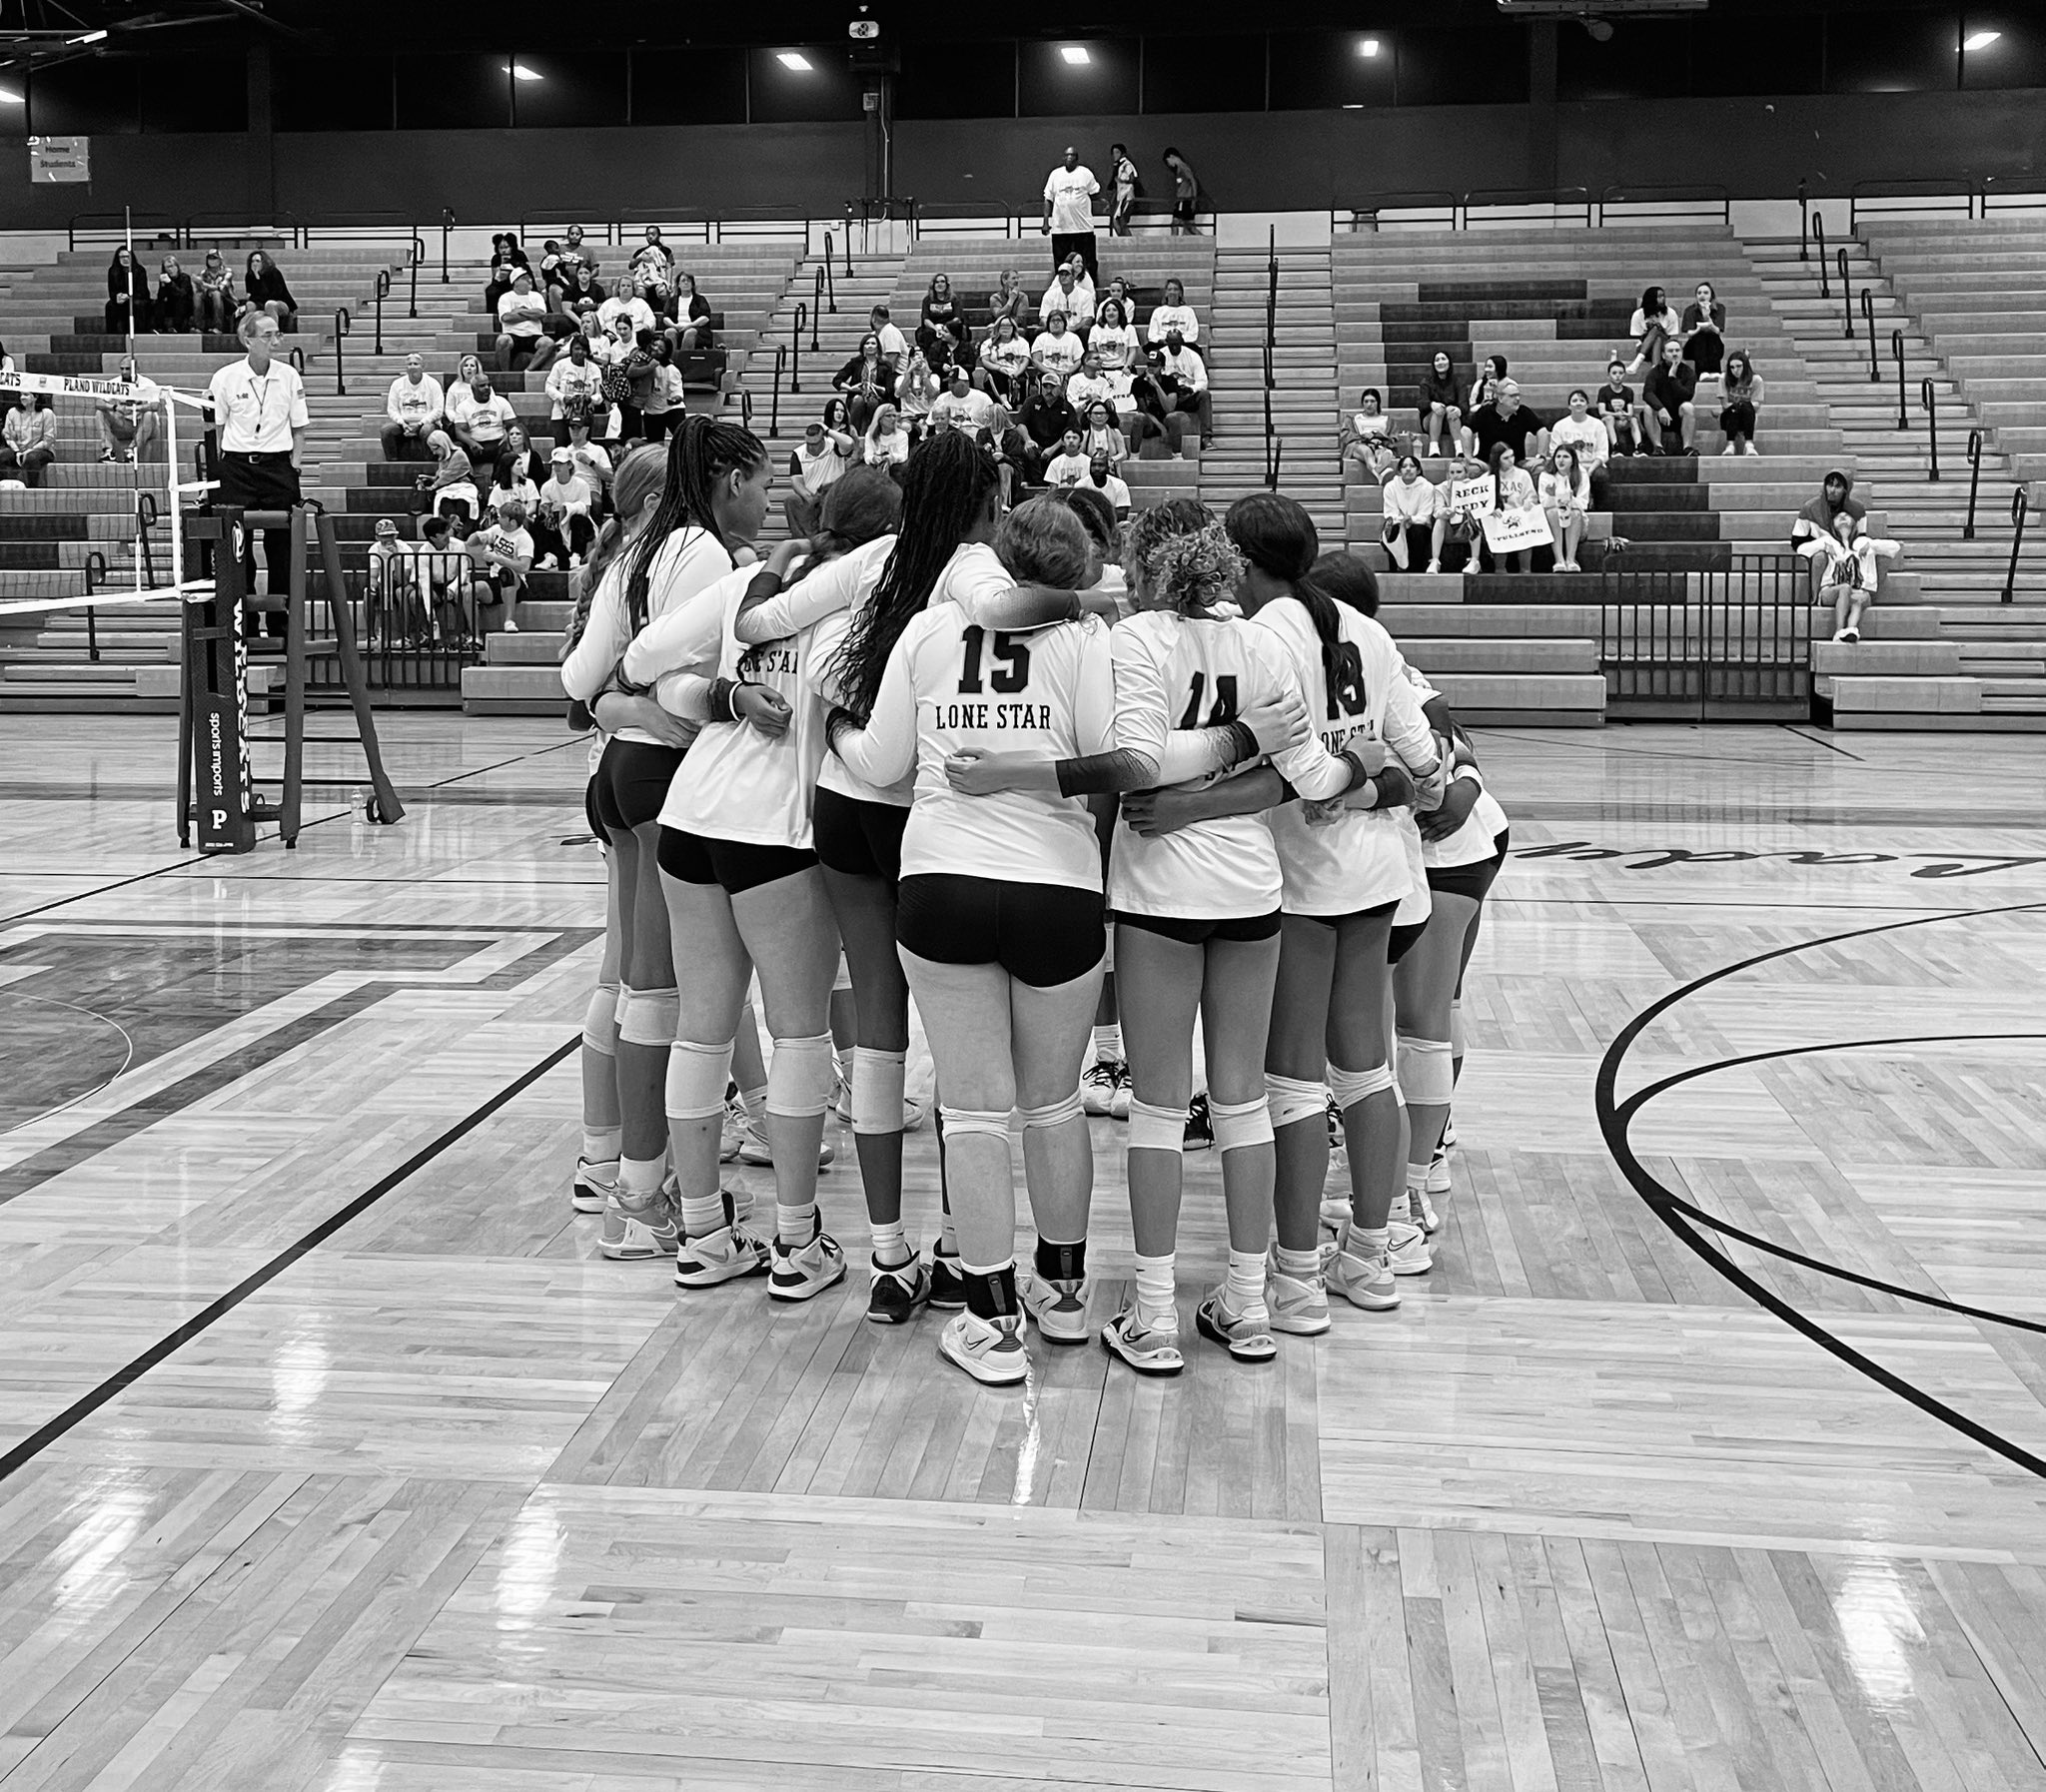 Lone Star Volleyball on Twitter "A historic season led by our